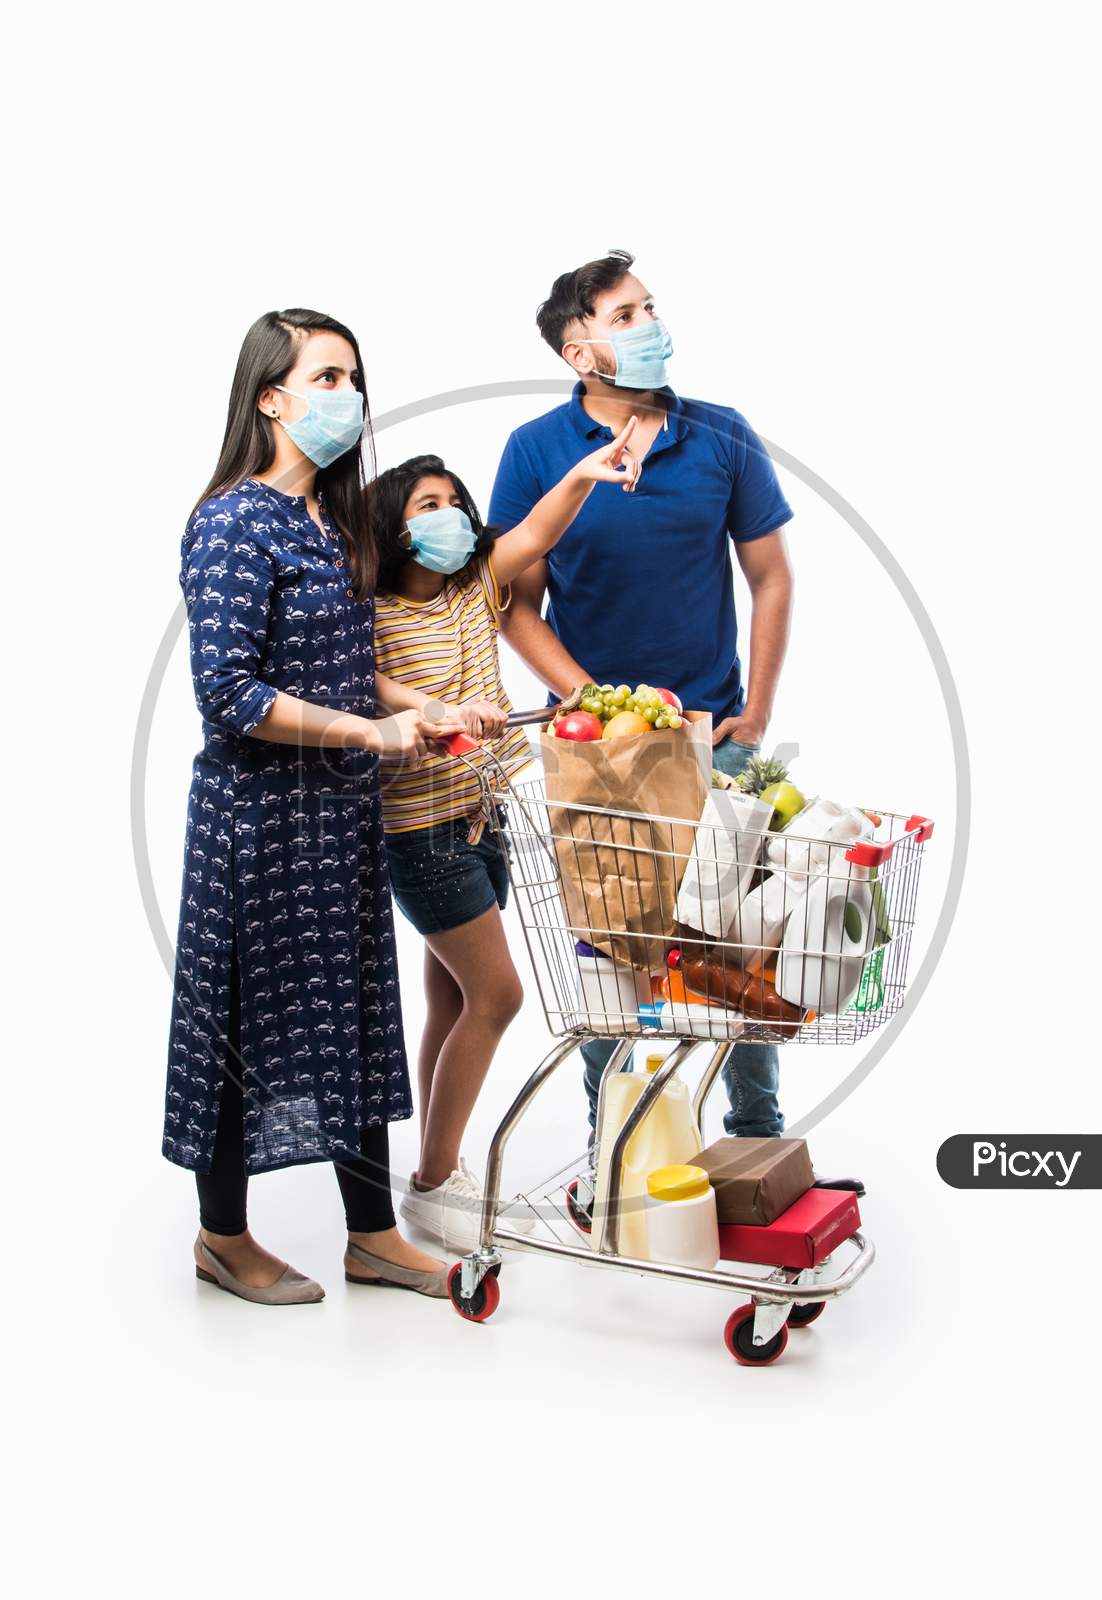 Indian Young Family Shopping Using Cart In Corona Or Covid-19 Pandemic Outbreak Wearing Mask